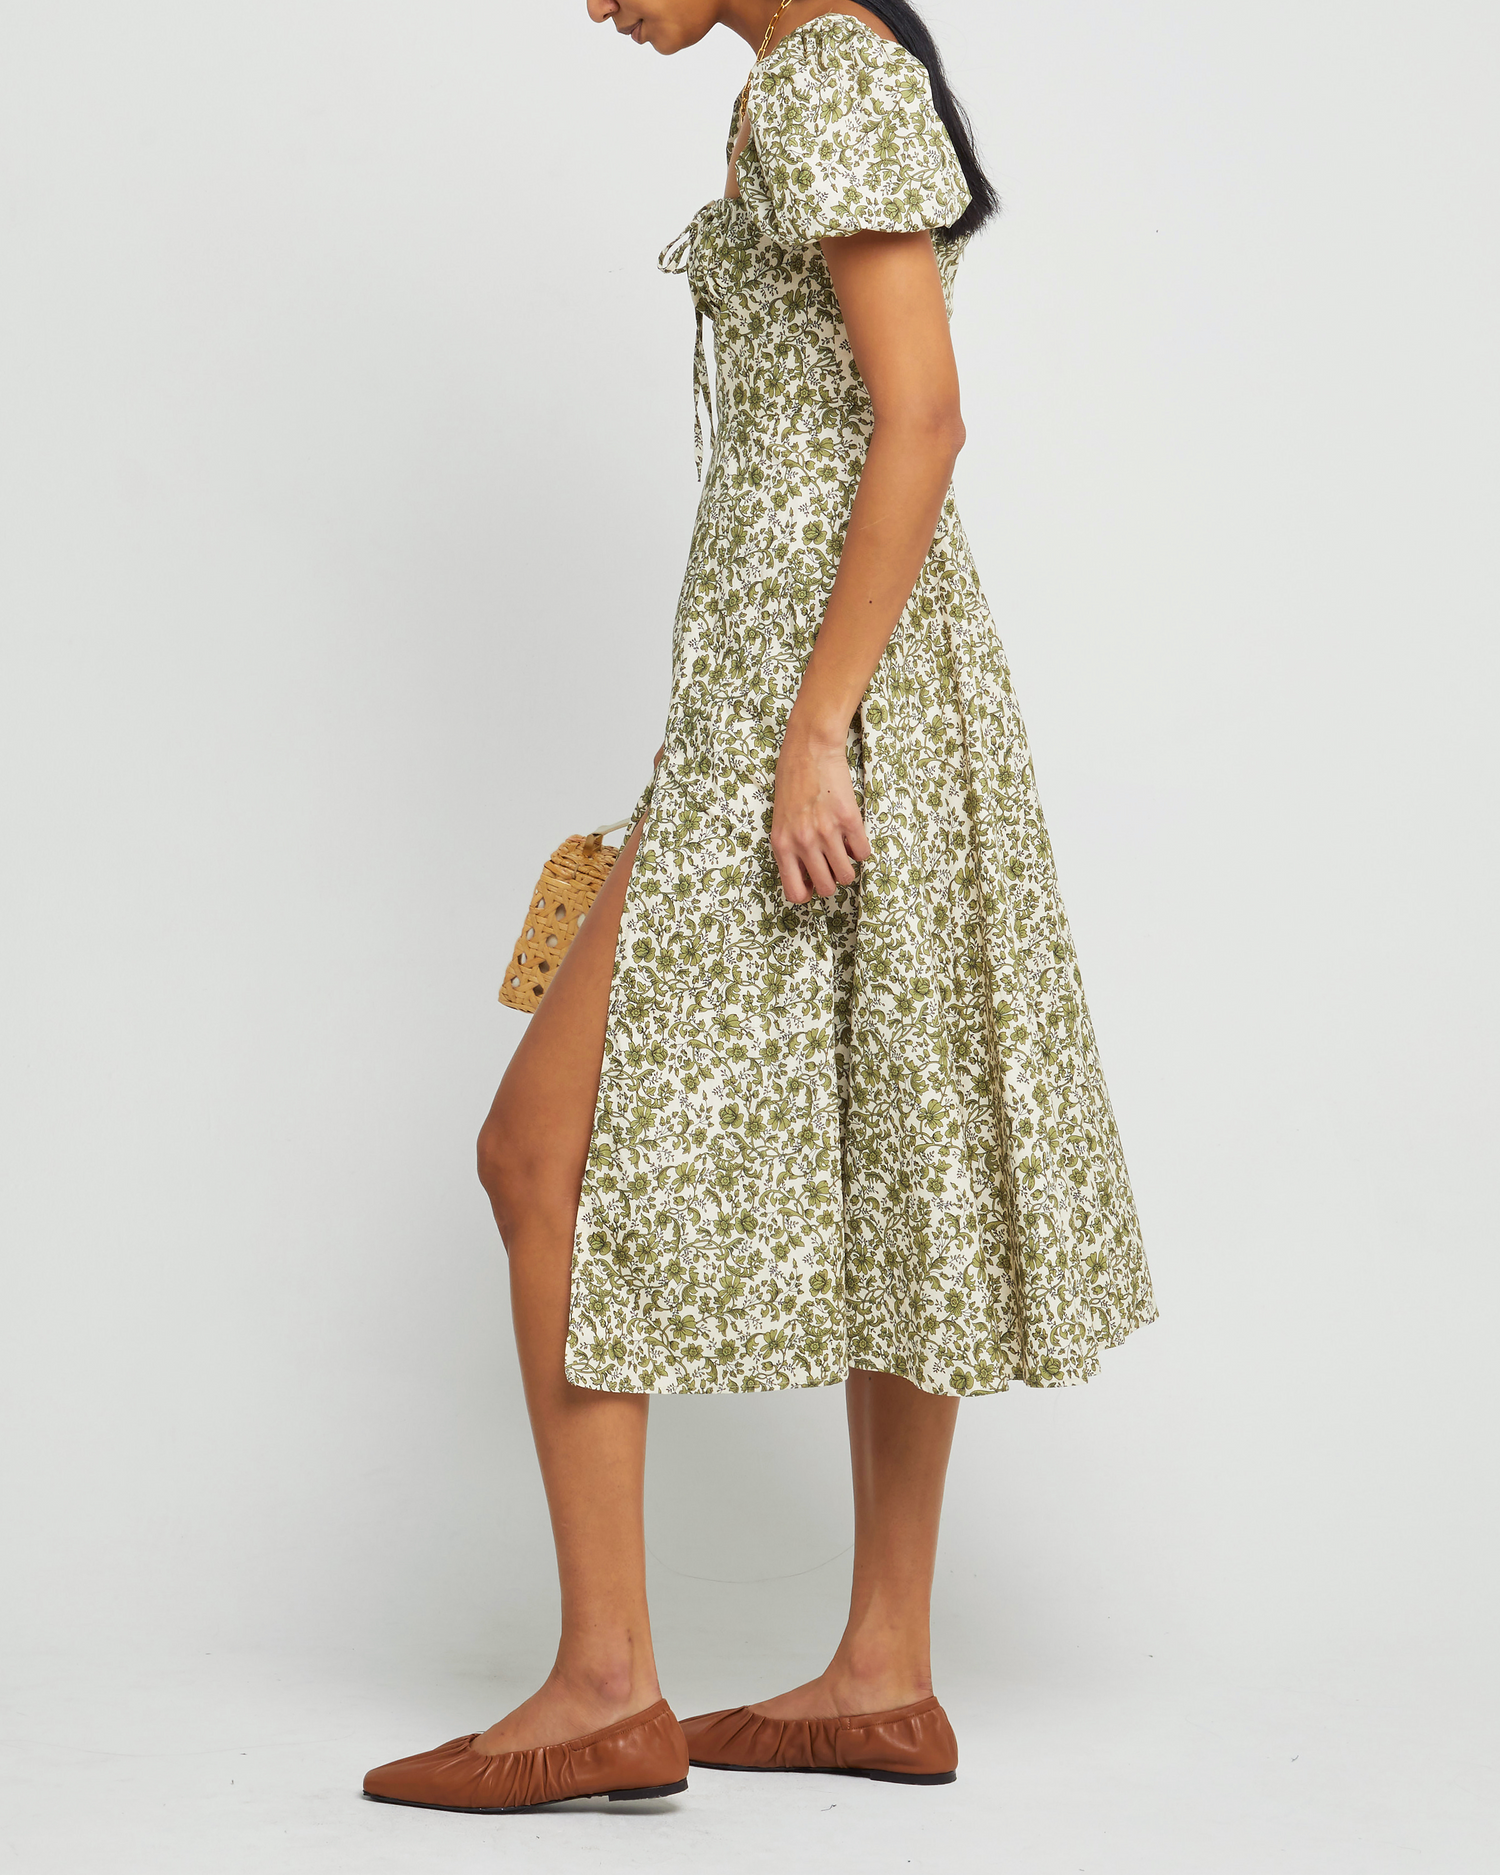 Third image of Cotton Peasant Dress, a green maxi dress, tie detail, puff sleeves, short sleeves, side slit